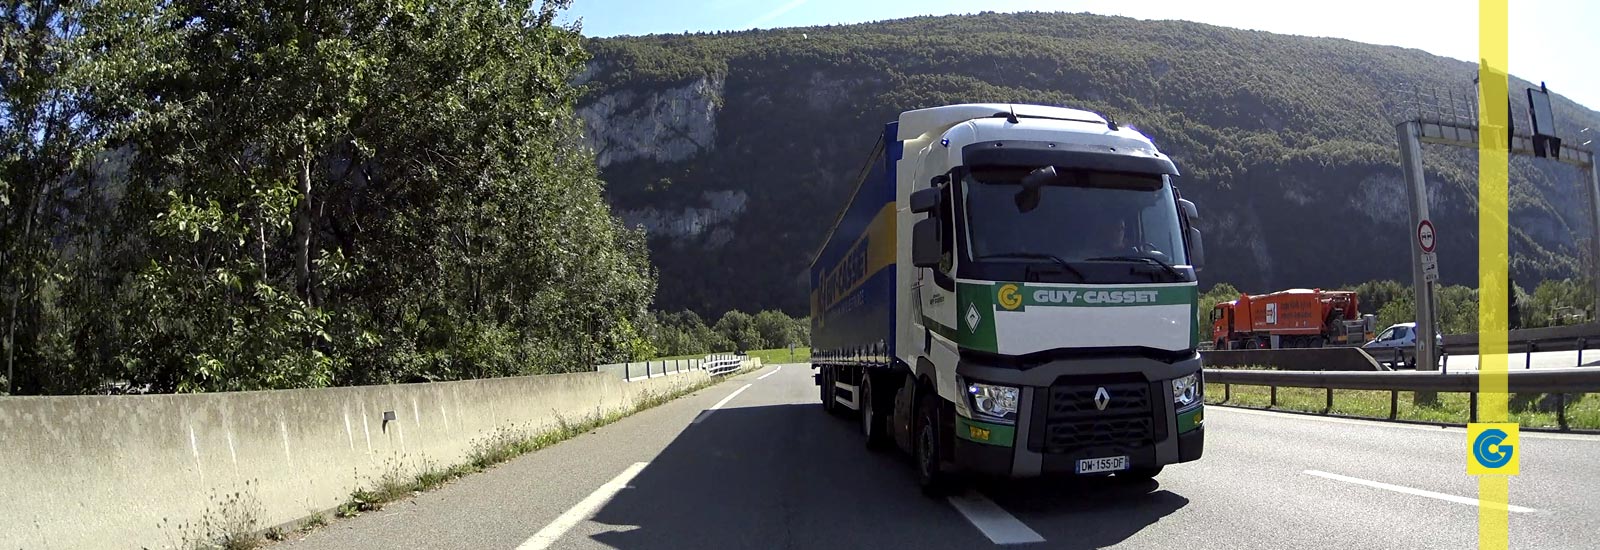 transport-routier-national